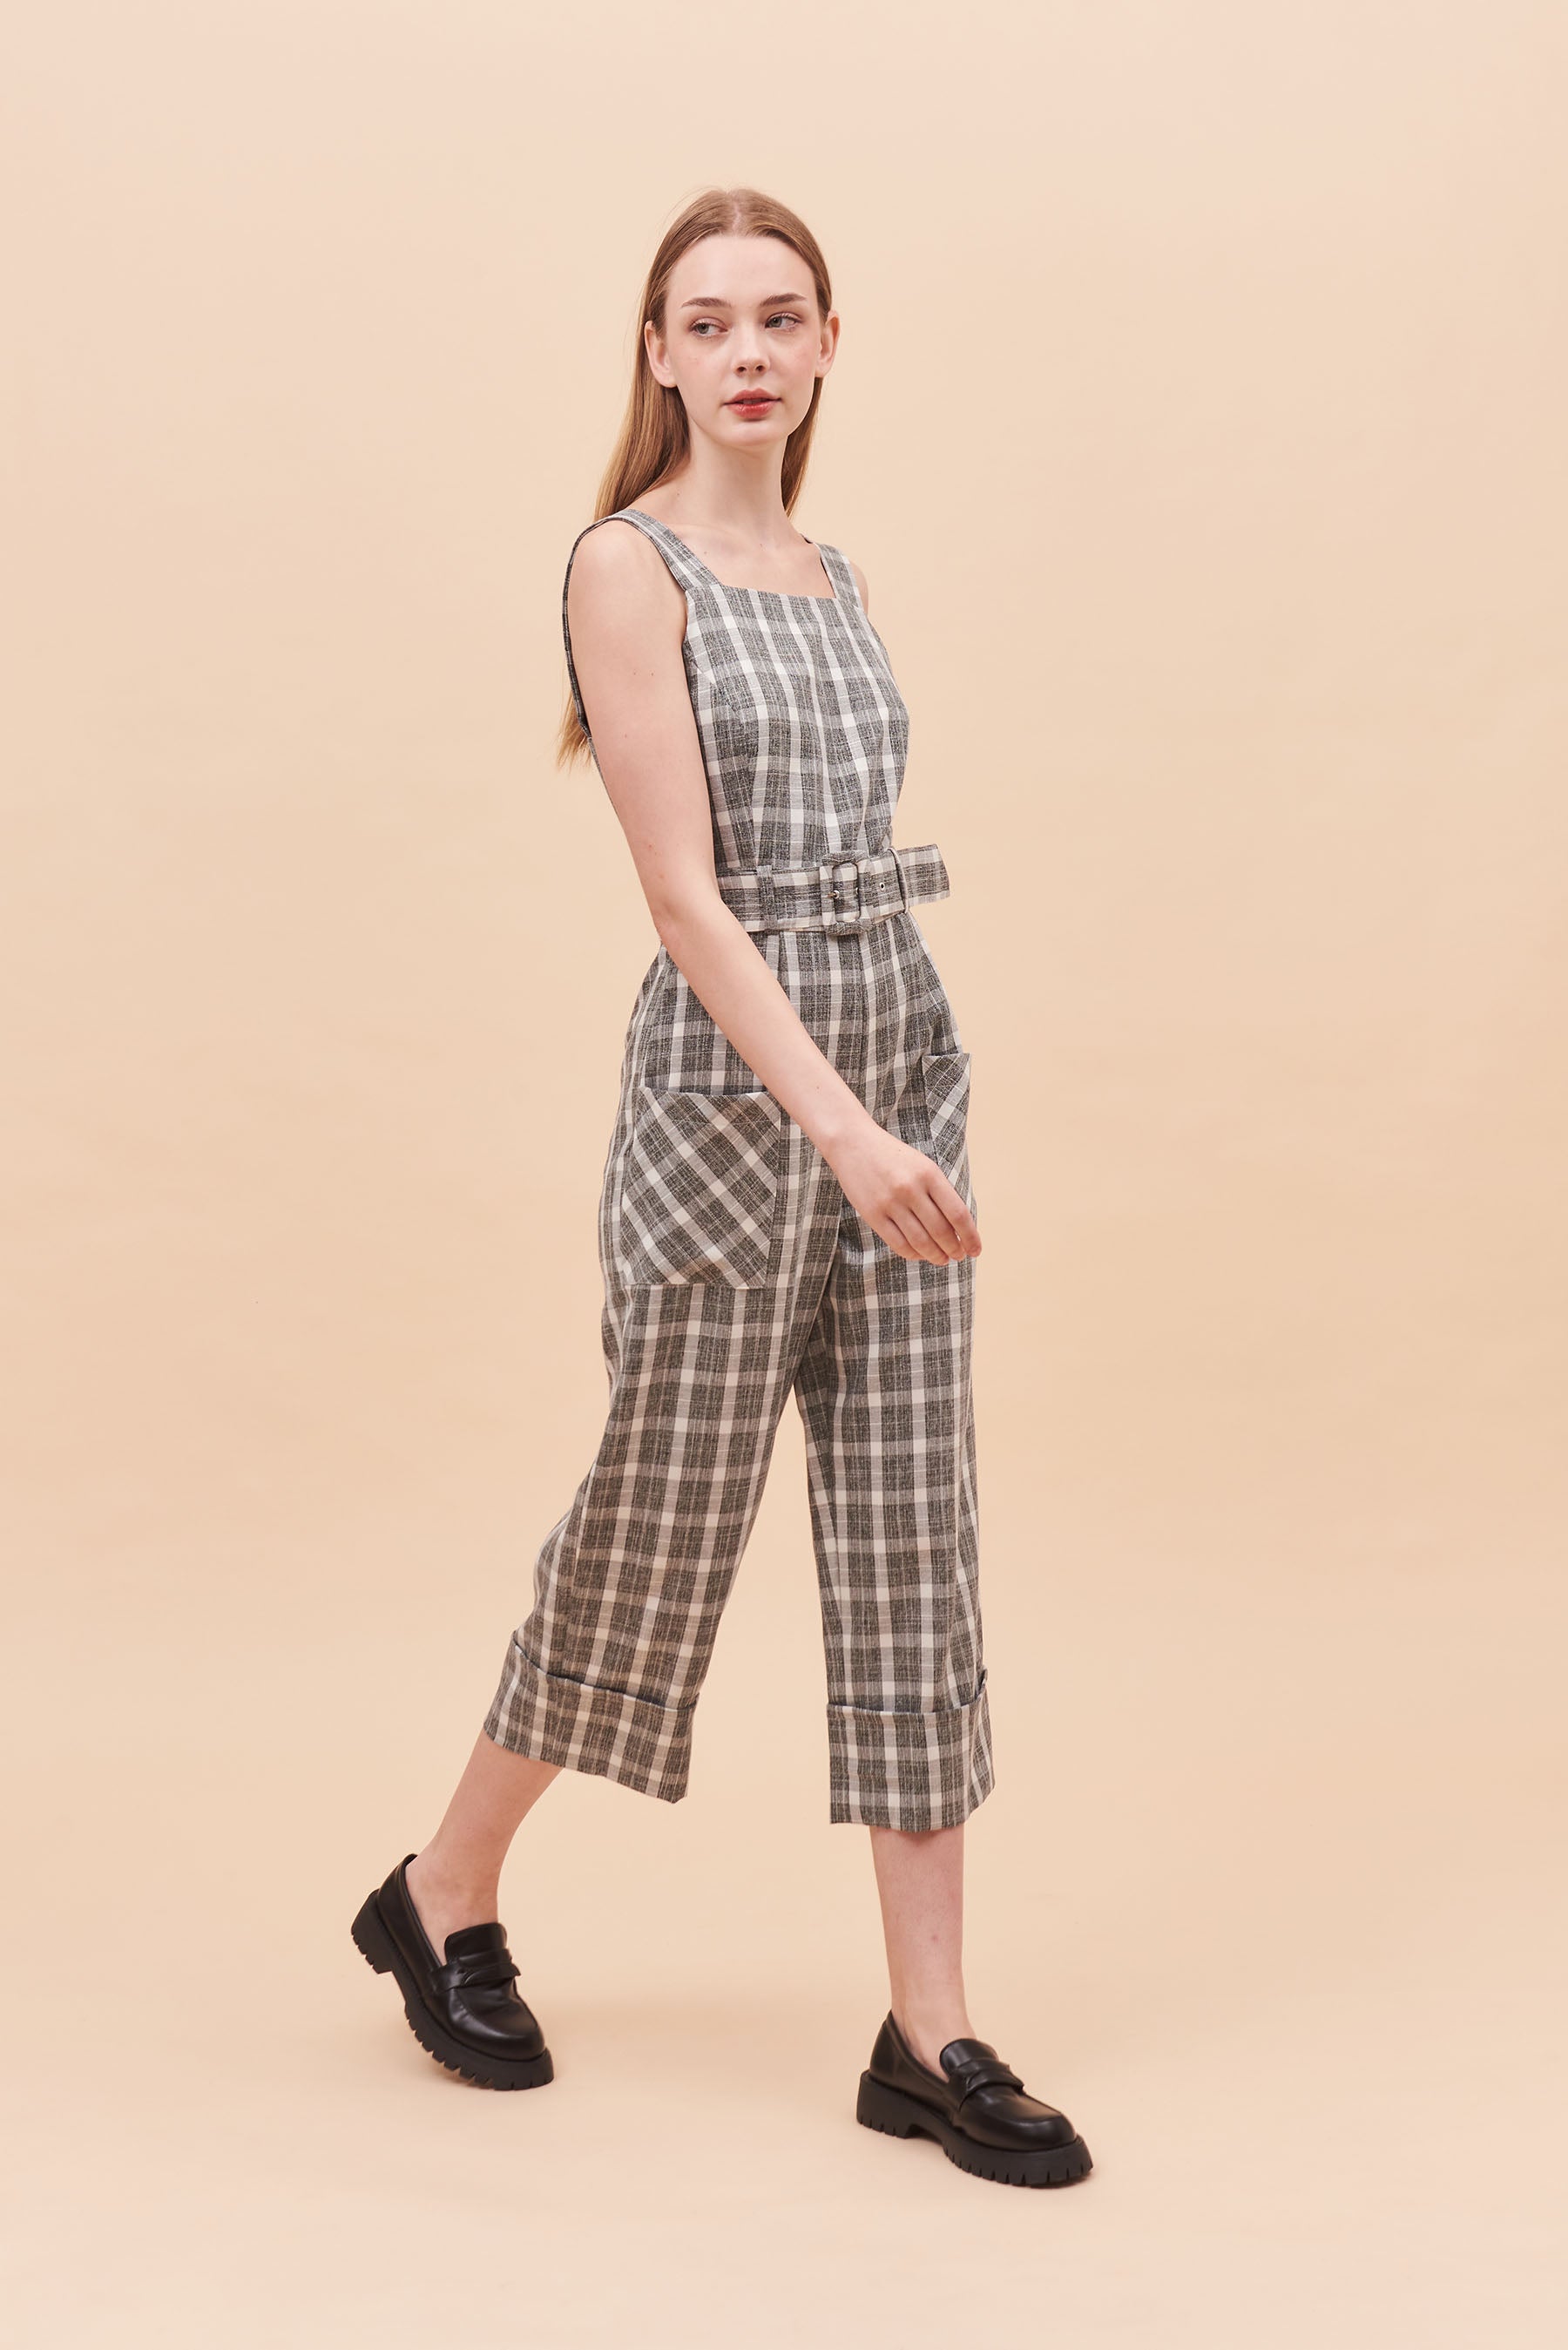 MAKE YOURSELF AT HOME | Pinafore Jumpsuits With Buckle Belt In Grey Plaids